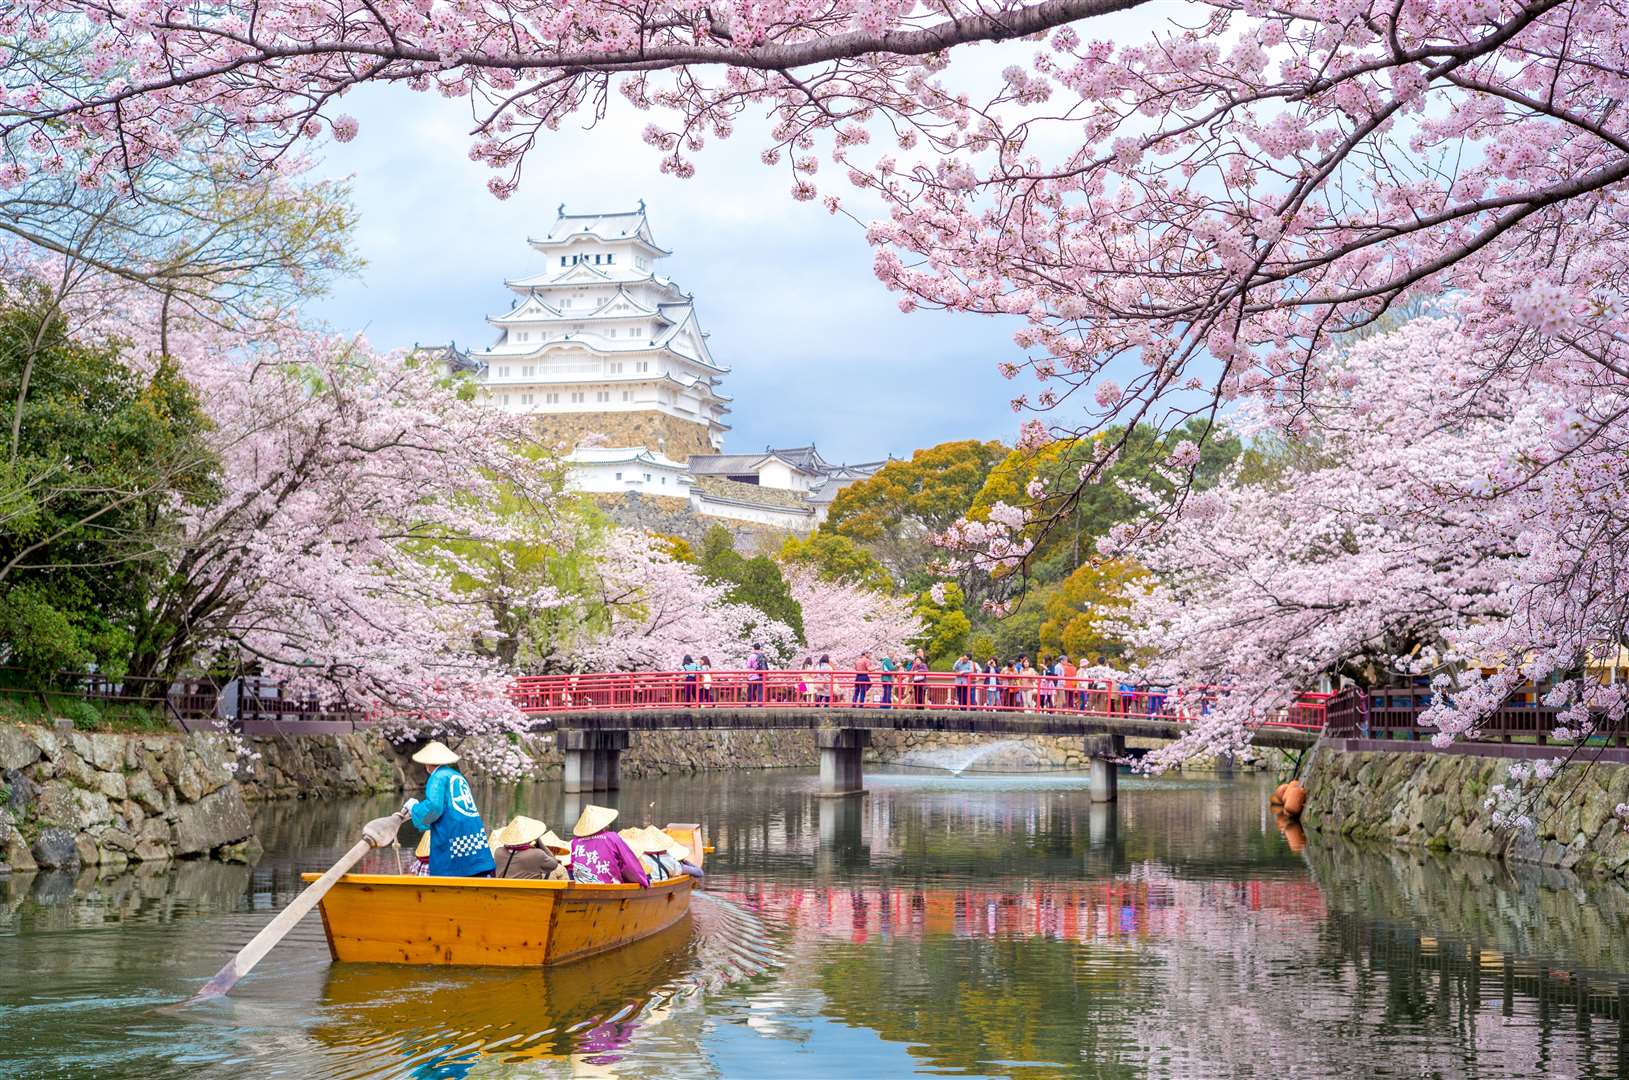 In Japan, celebrations take place throughout blossom season. Image: iStock.